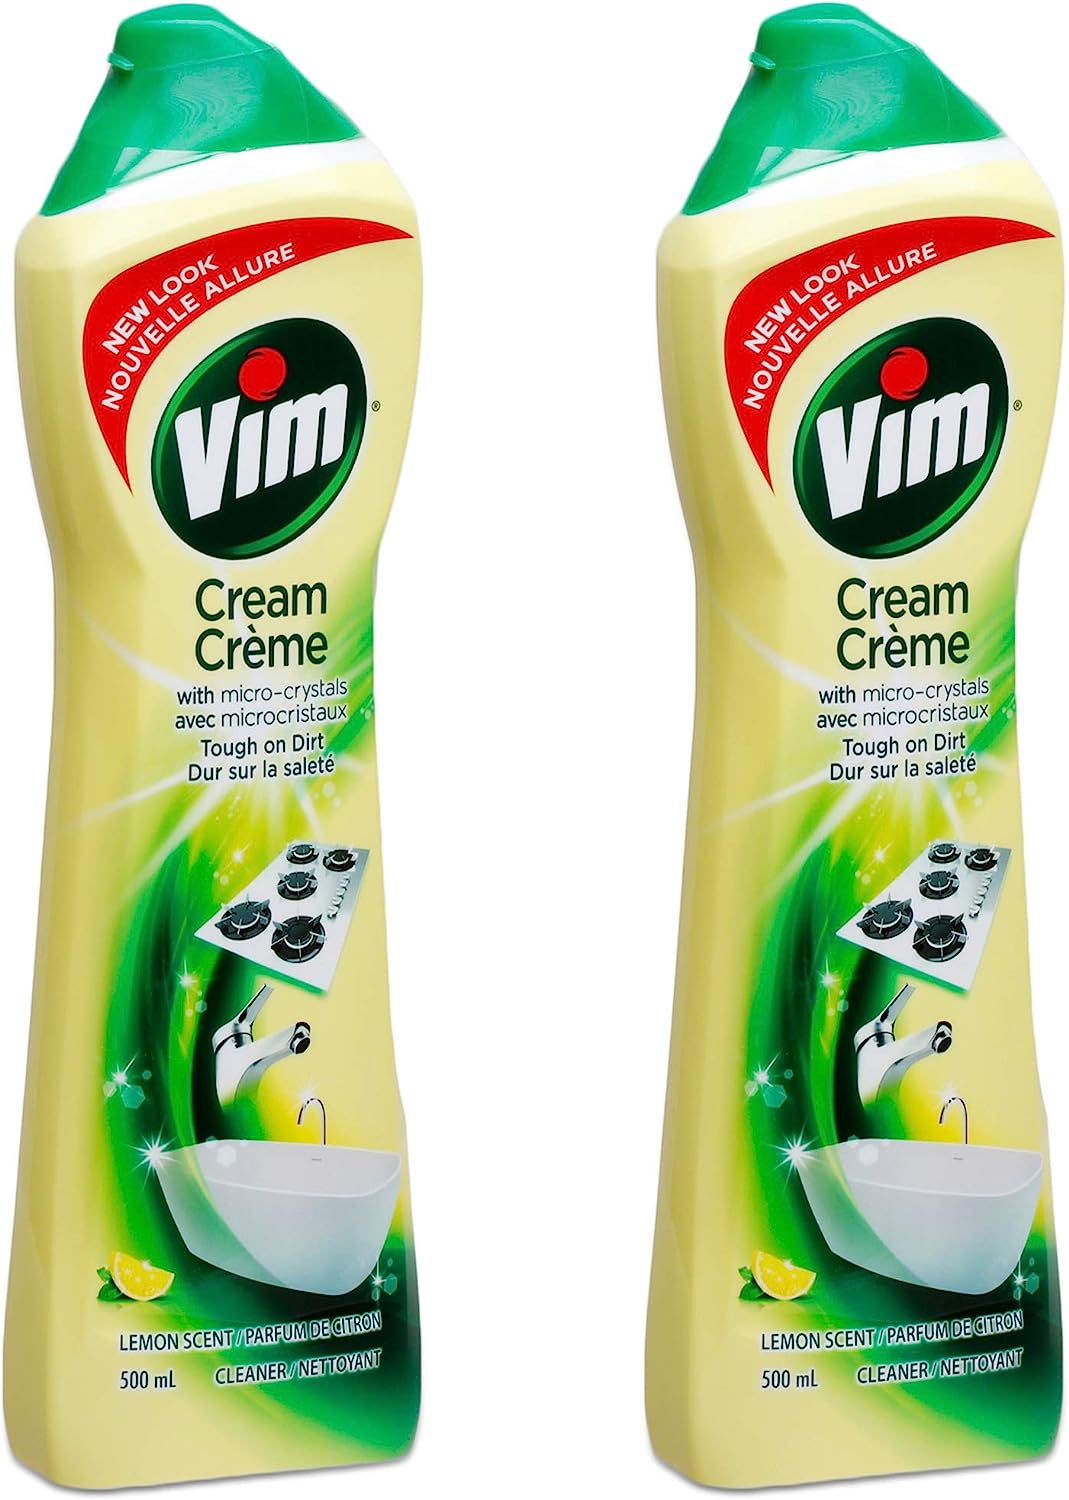 Vim (Cif) Multi-Purpose Cream Cleanser with Micro Crystals, Lemon Scent -  500ml (Pack of 2)